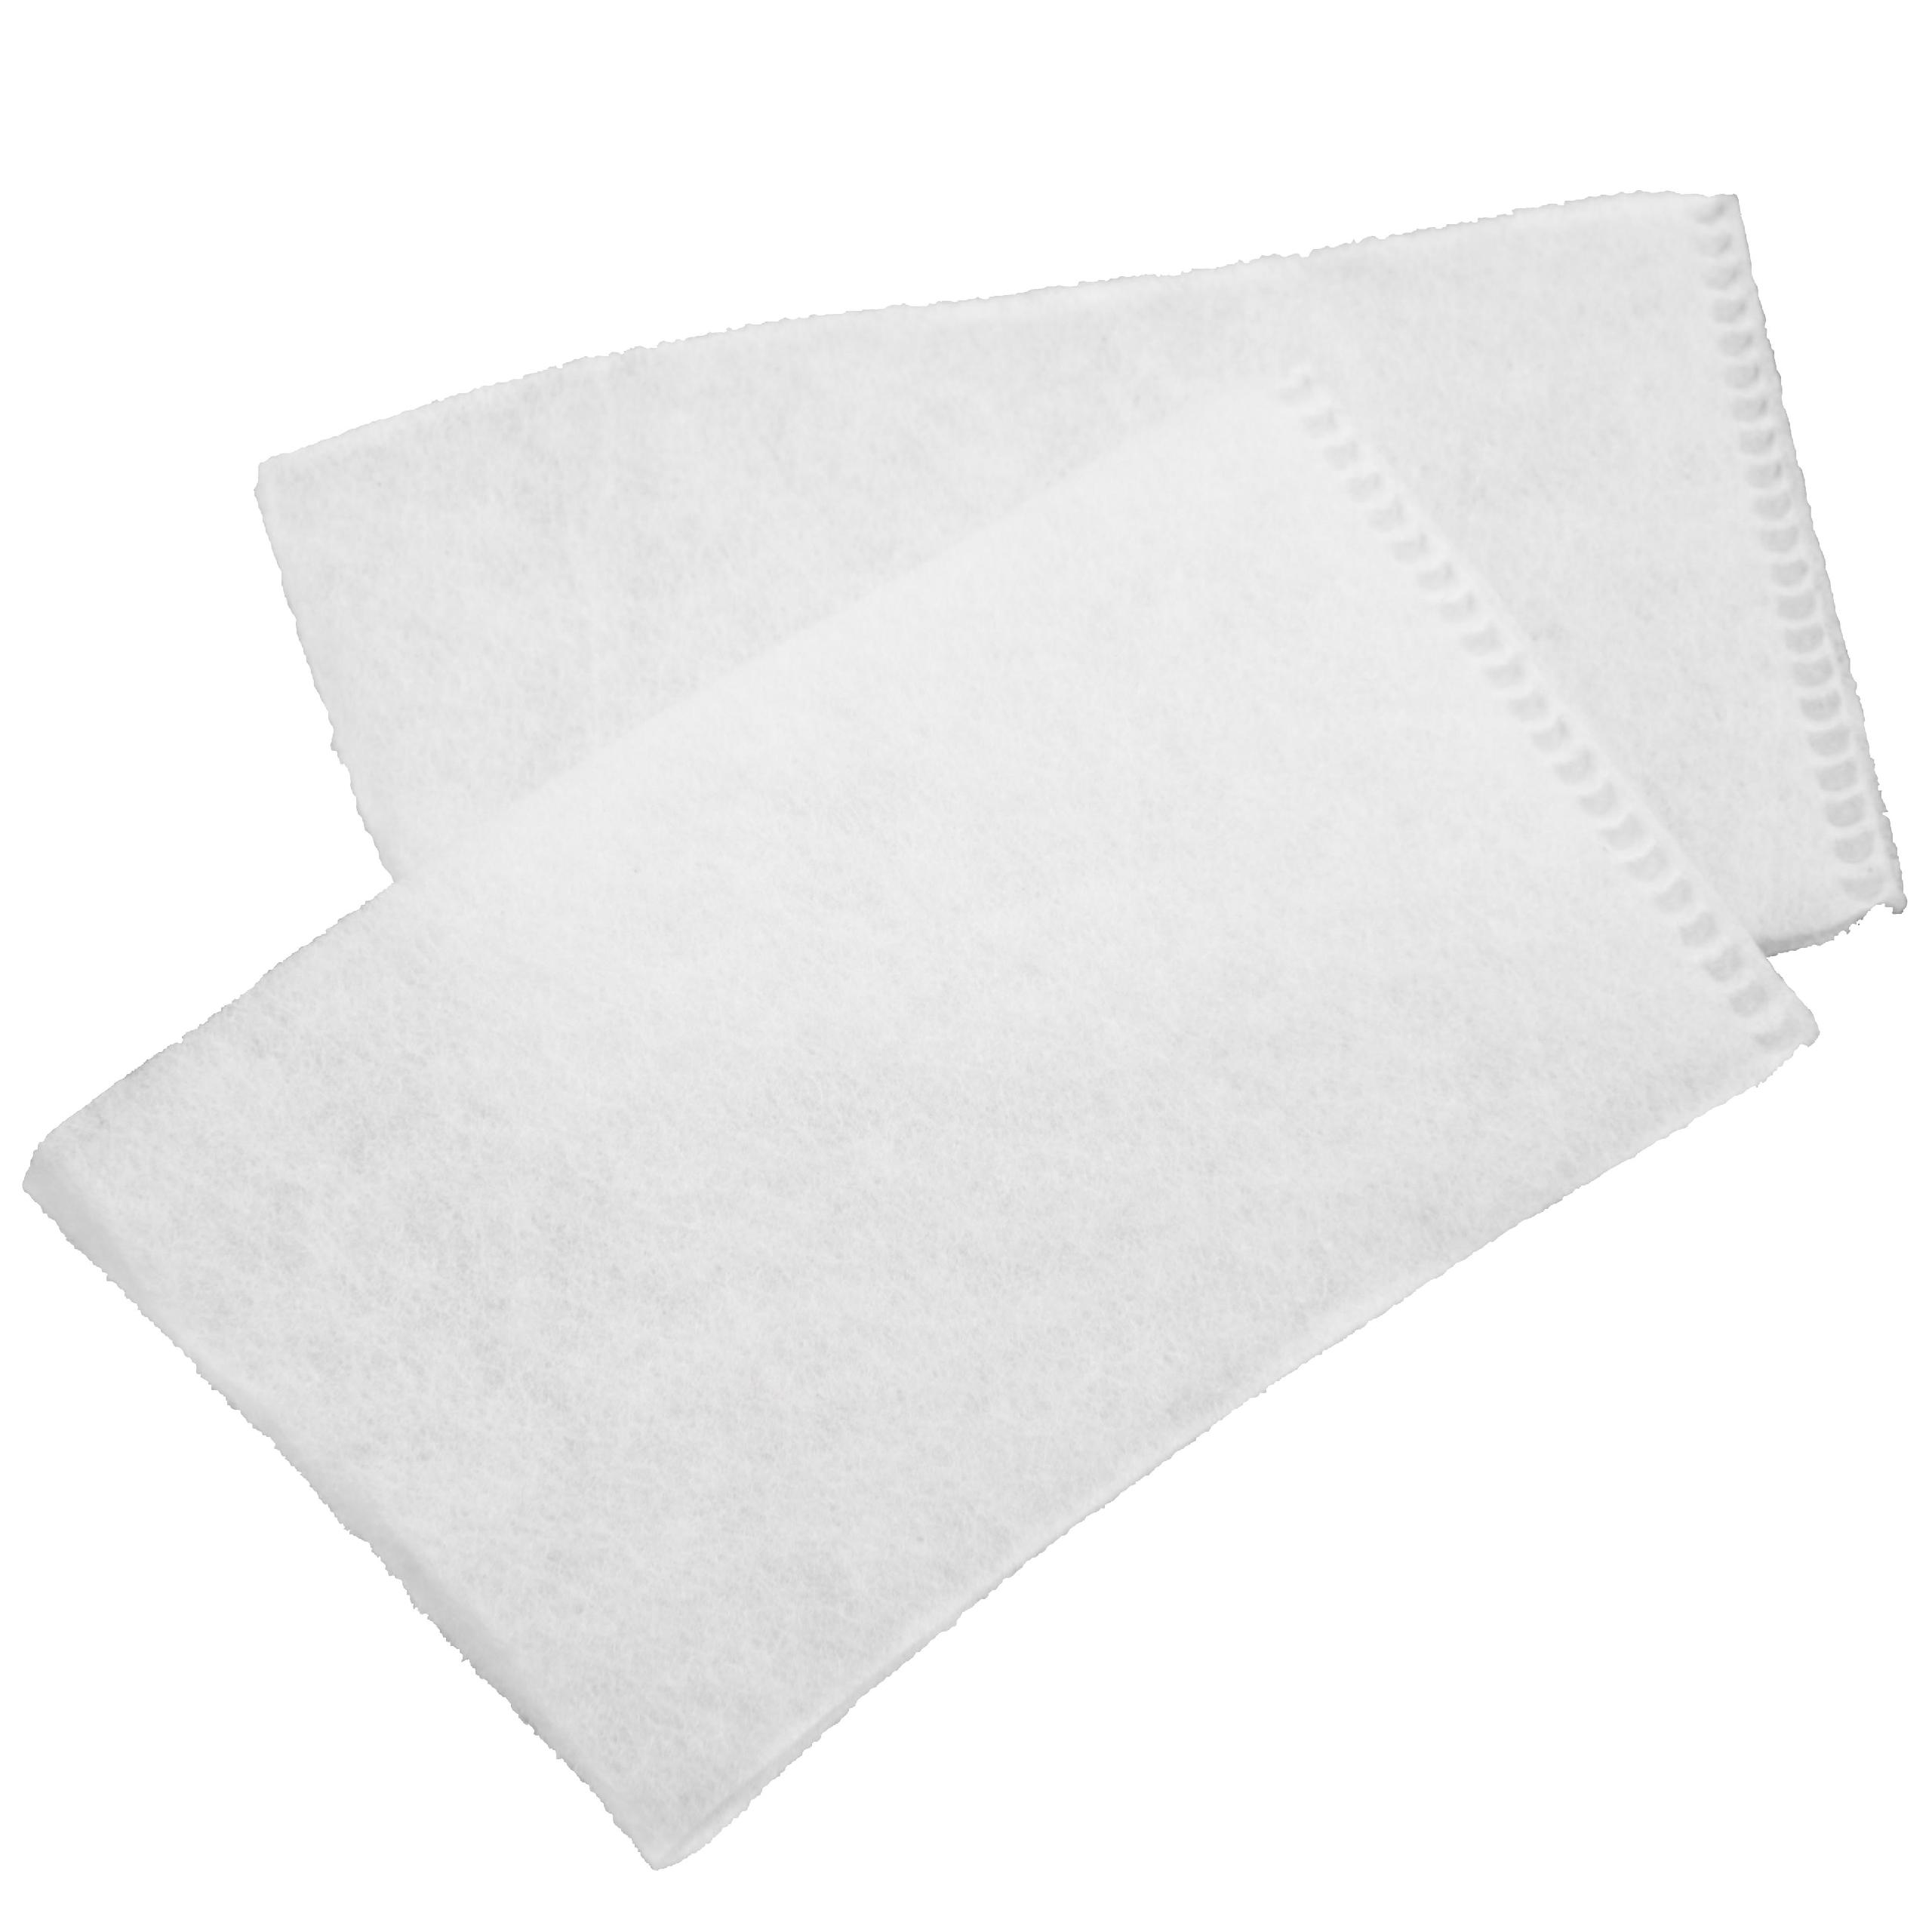 Set 2x Filter Sleeves replaces Dirt Devil 2725077 for Dirt Devil Vacuum Cleaner - Filter Protection White